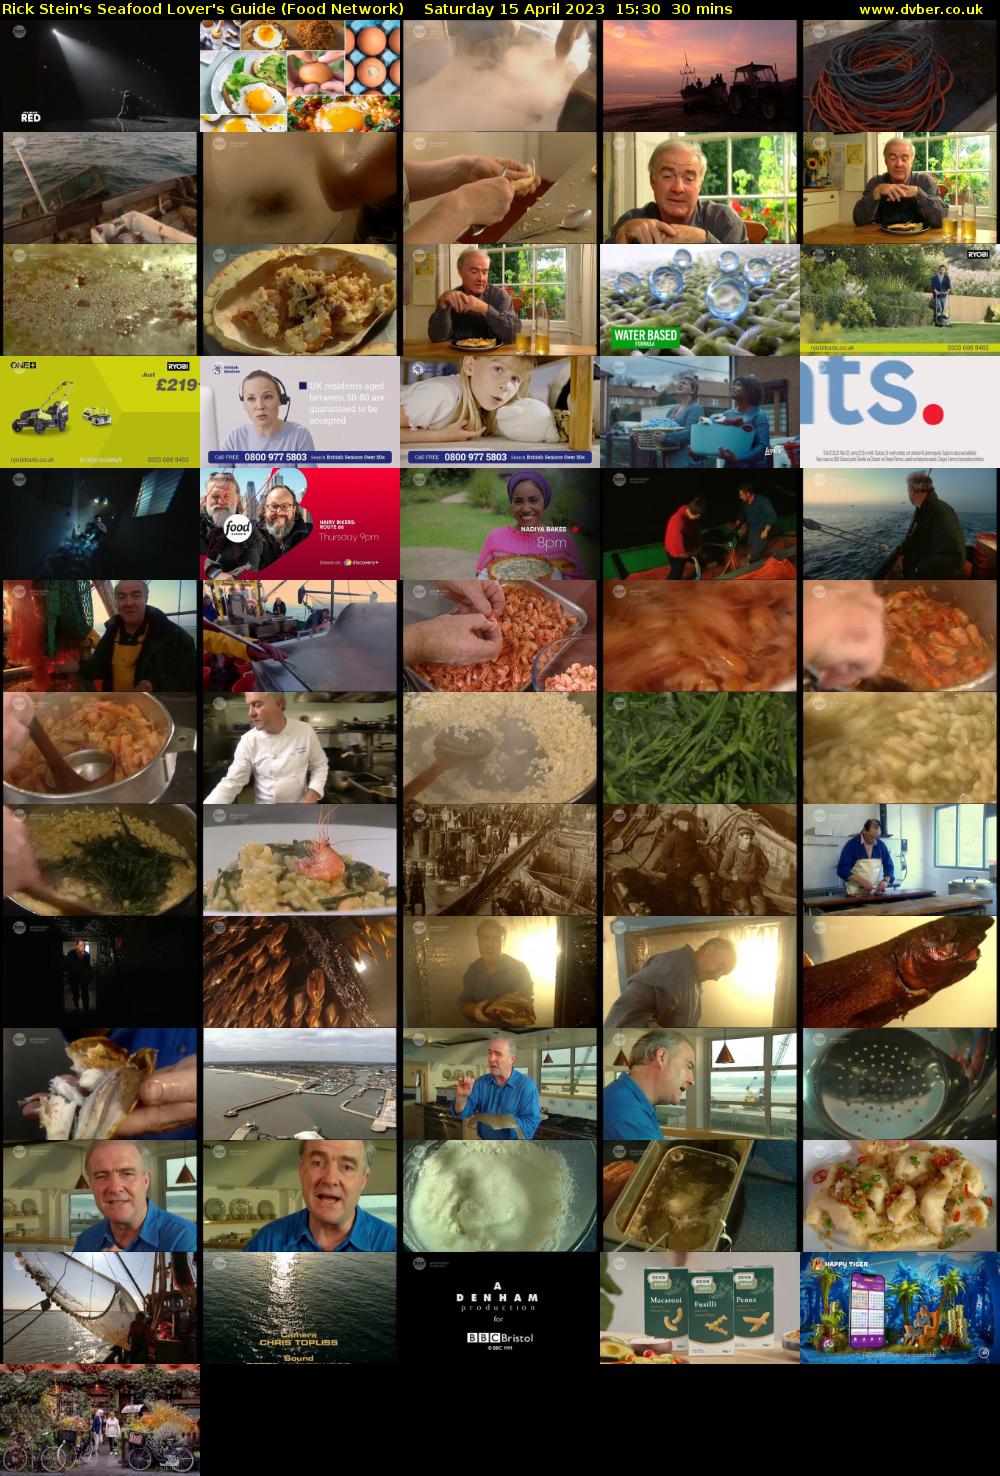 Rick Stein's Seafood Lover's Guide (Food Network) Saturday 15 April 2023 15:30 - 16:00